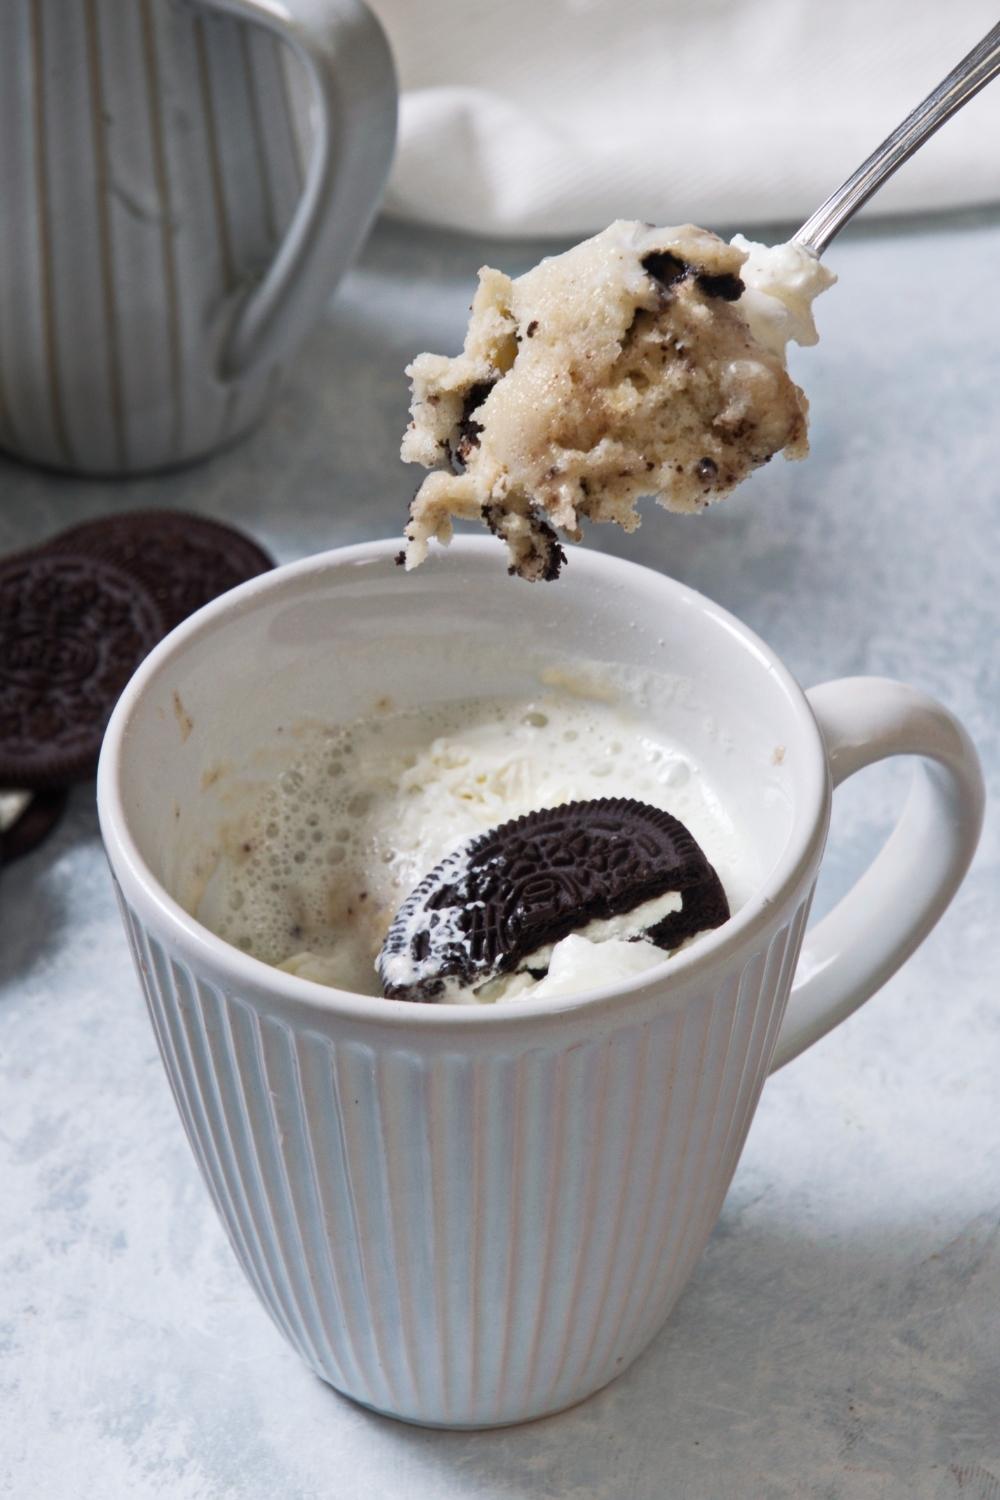 A close-up of a mug containing homemade Oreo mug cake topped with whipped cream and a half an Oreo. A spoon holds a heaping scoop of the homemade Oreo mug cake above the mug.